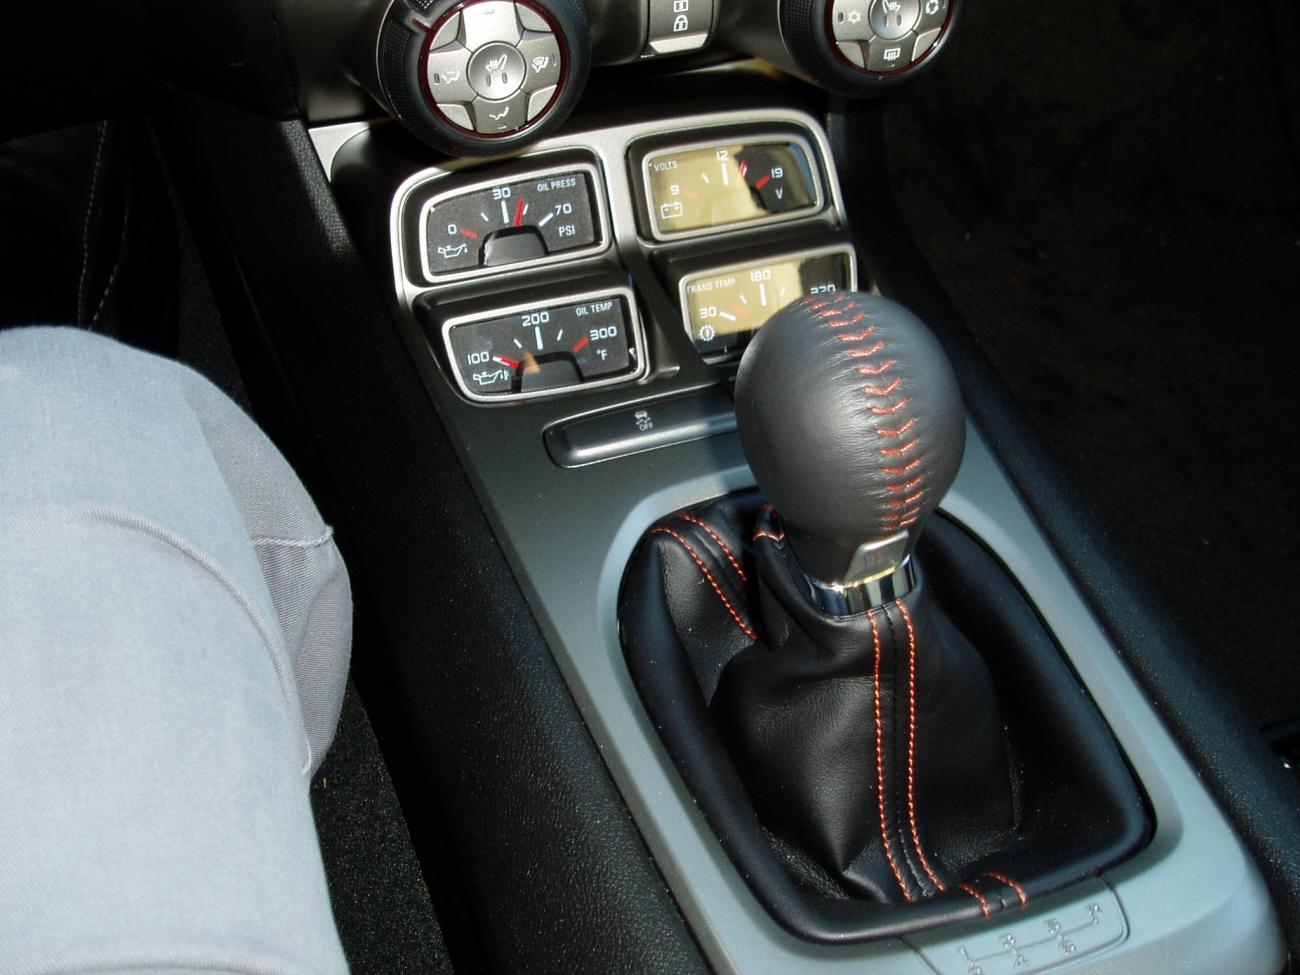 Camaro SSRS 6 speed shifter with the orange stitcing rest of the car is tan "is this a factory mistake ?? " I called the dealer and they are not sure why it is this color.  Any others out there with the same issue??